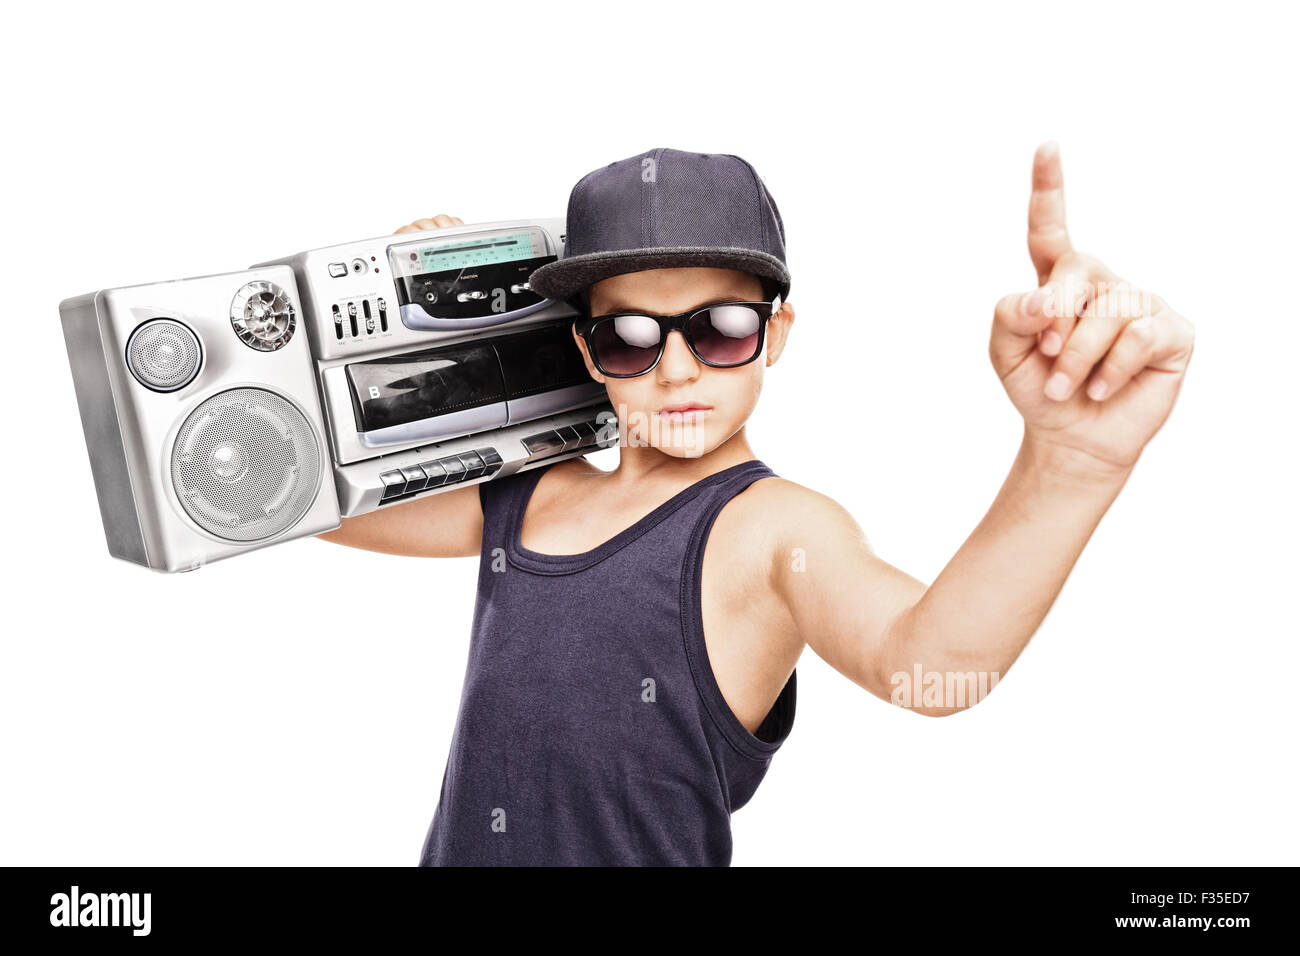 Junior rapper carrying a ghetto blaster and gesturing with his hand isolated on white background Stock Photo